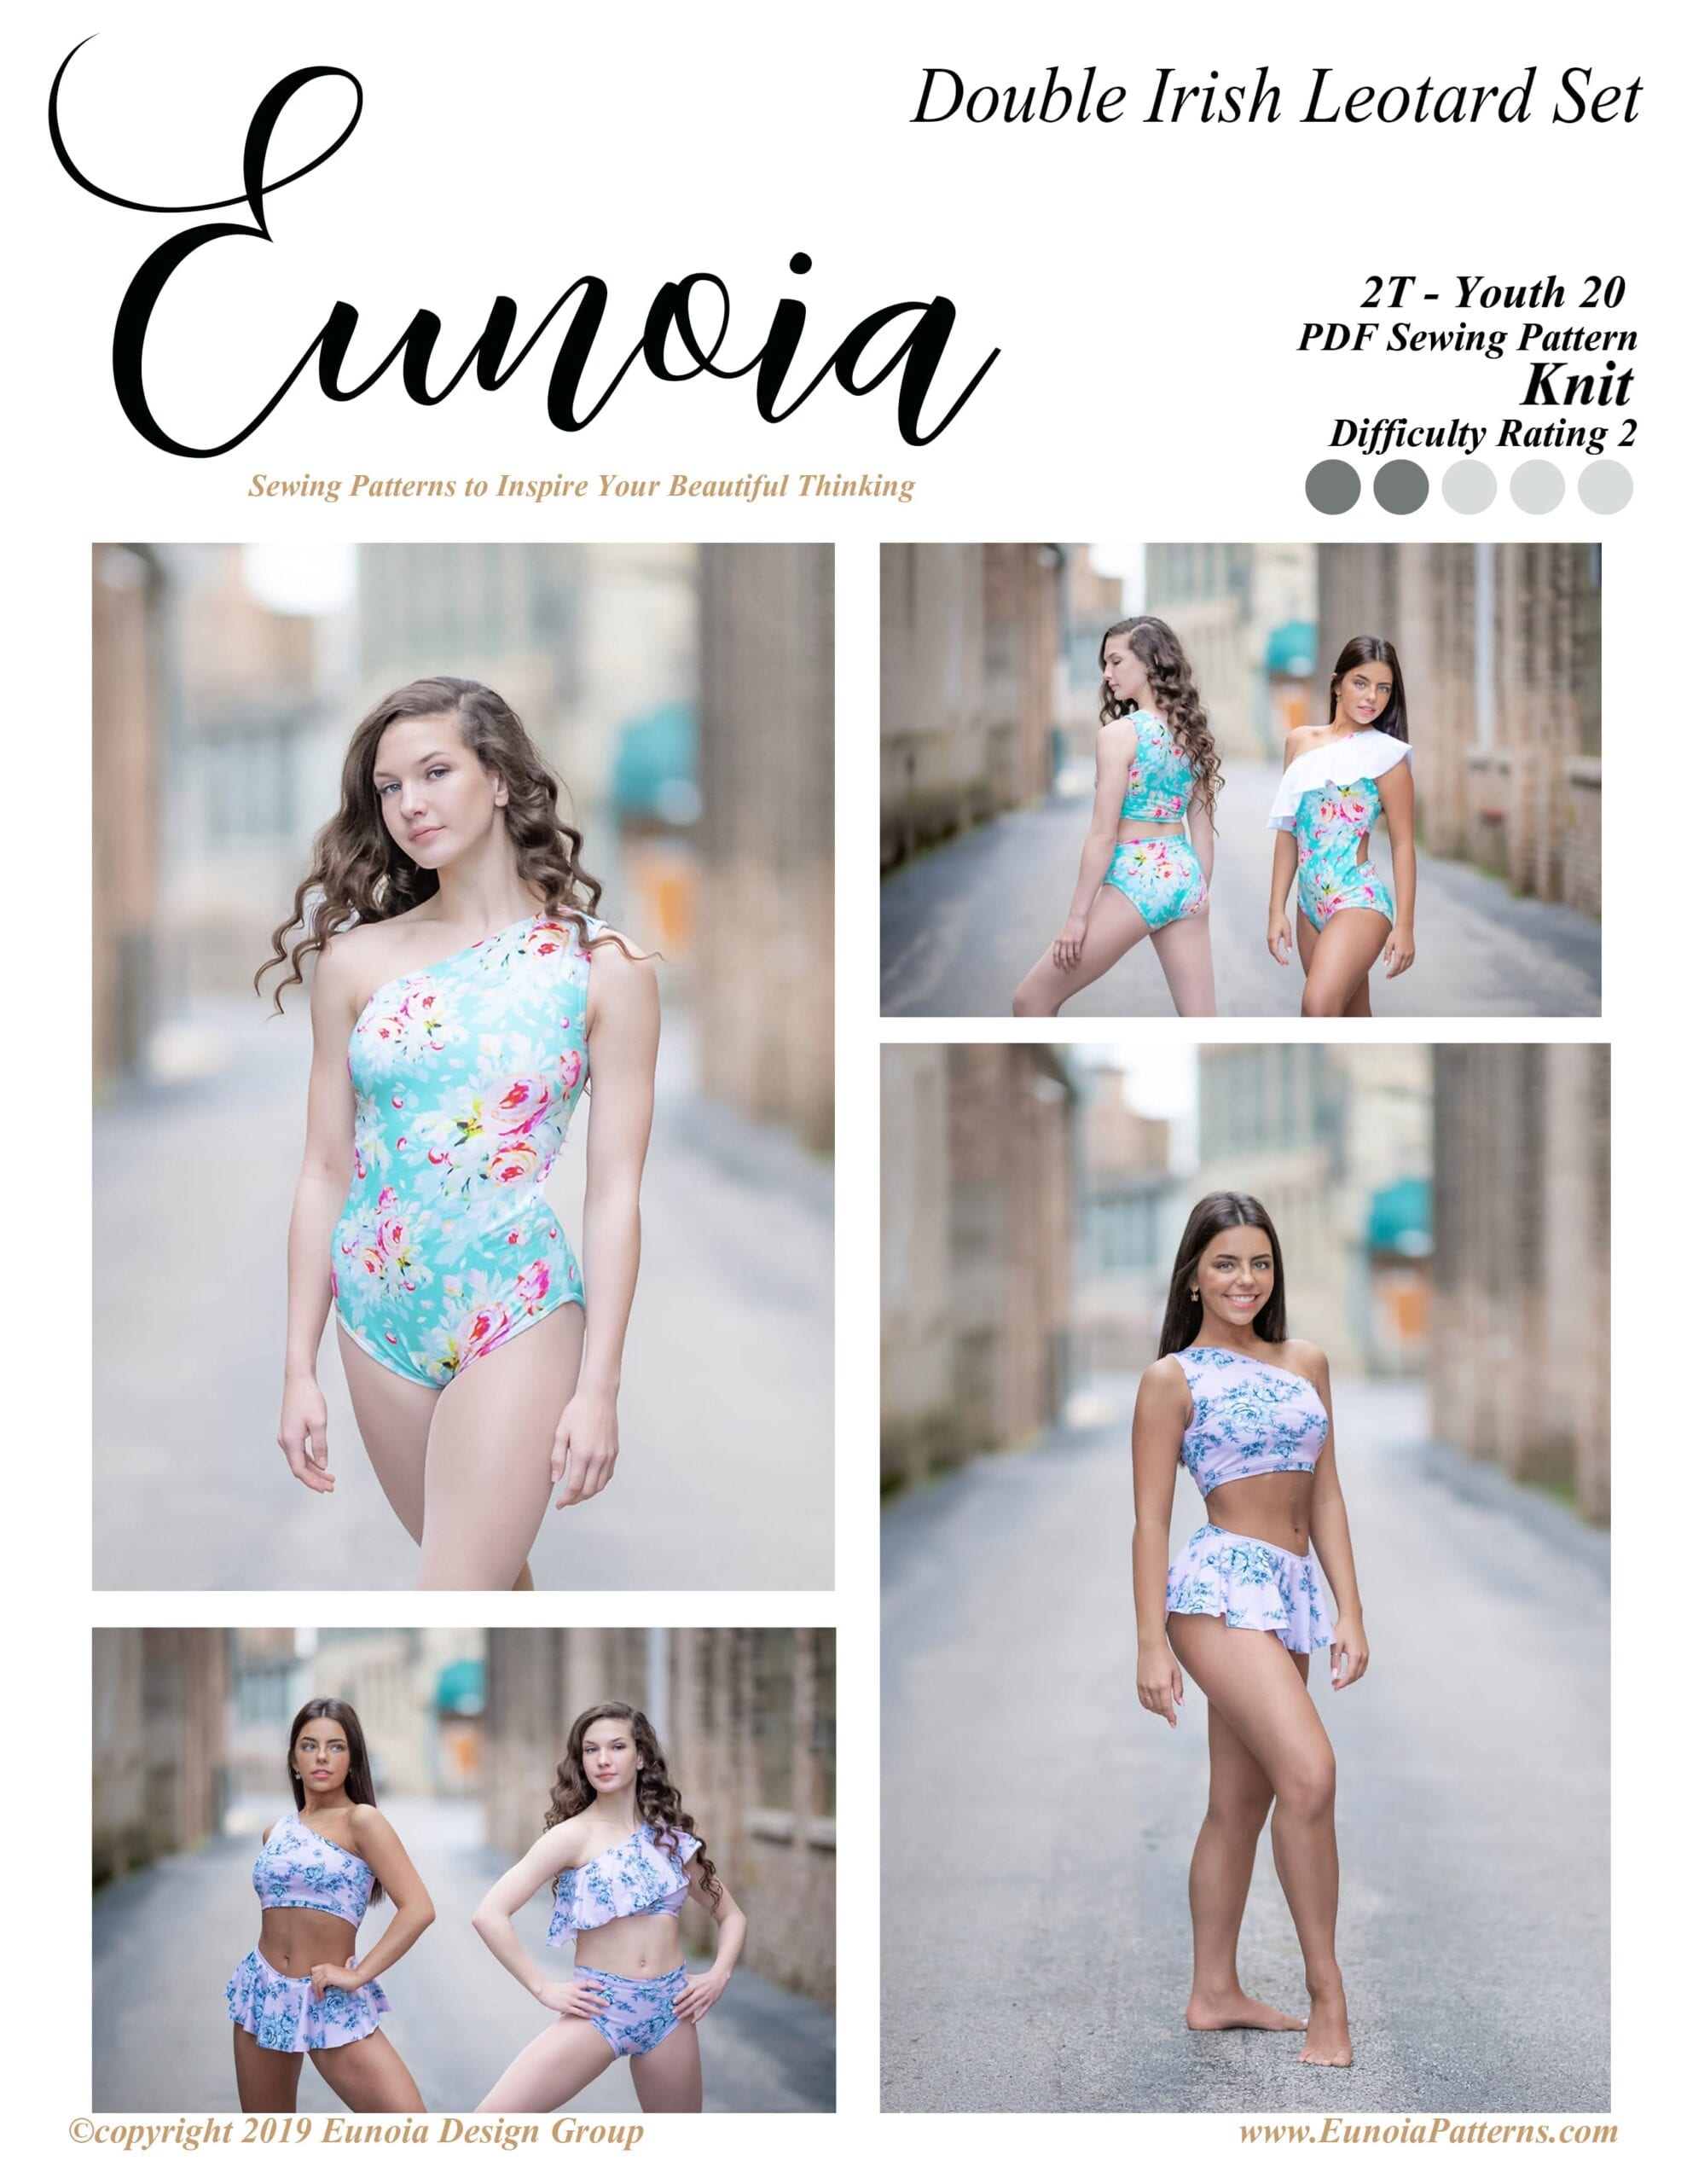 Double Irish Leotard & Bathing Suit Set  Eunoia Design Group PDF Sewing  Patterns for Youth, Adults, Quilts & Home